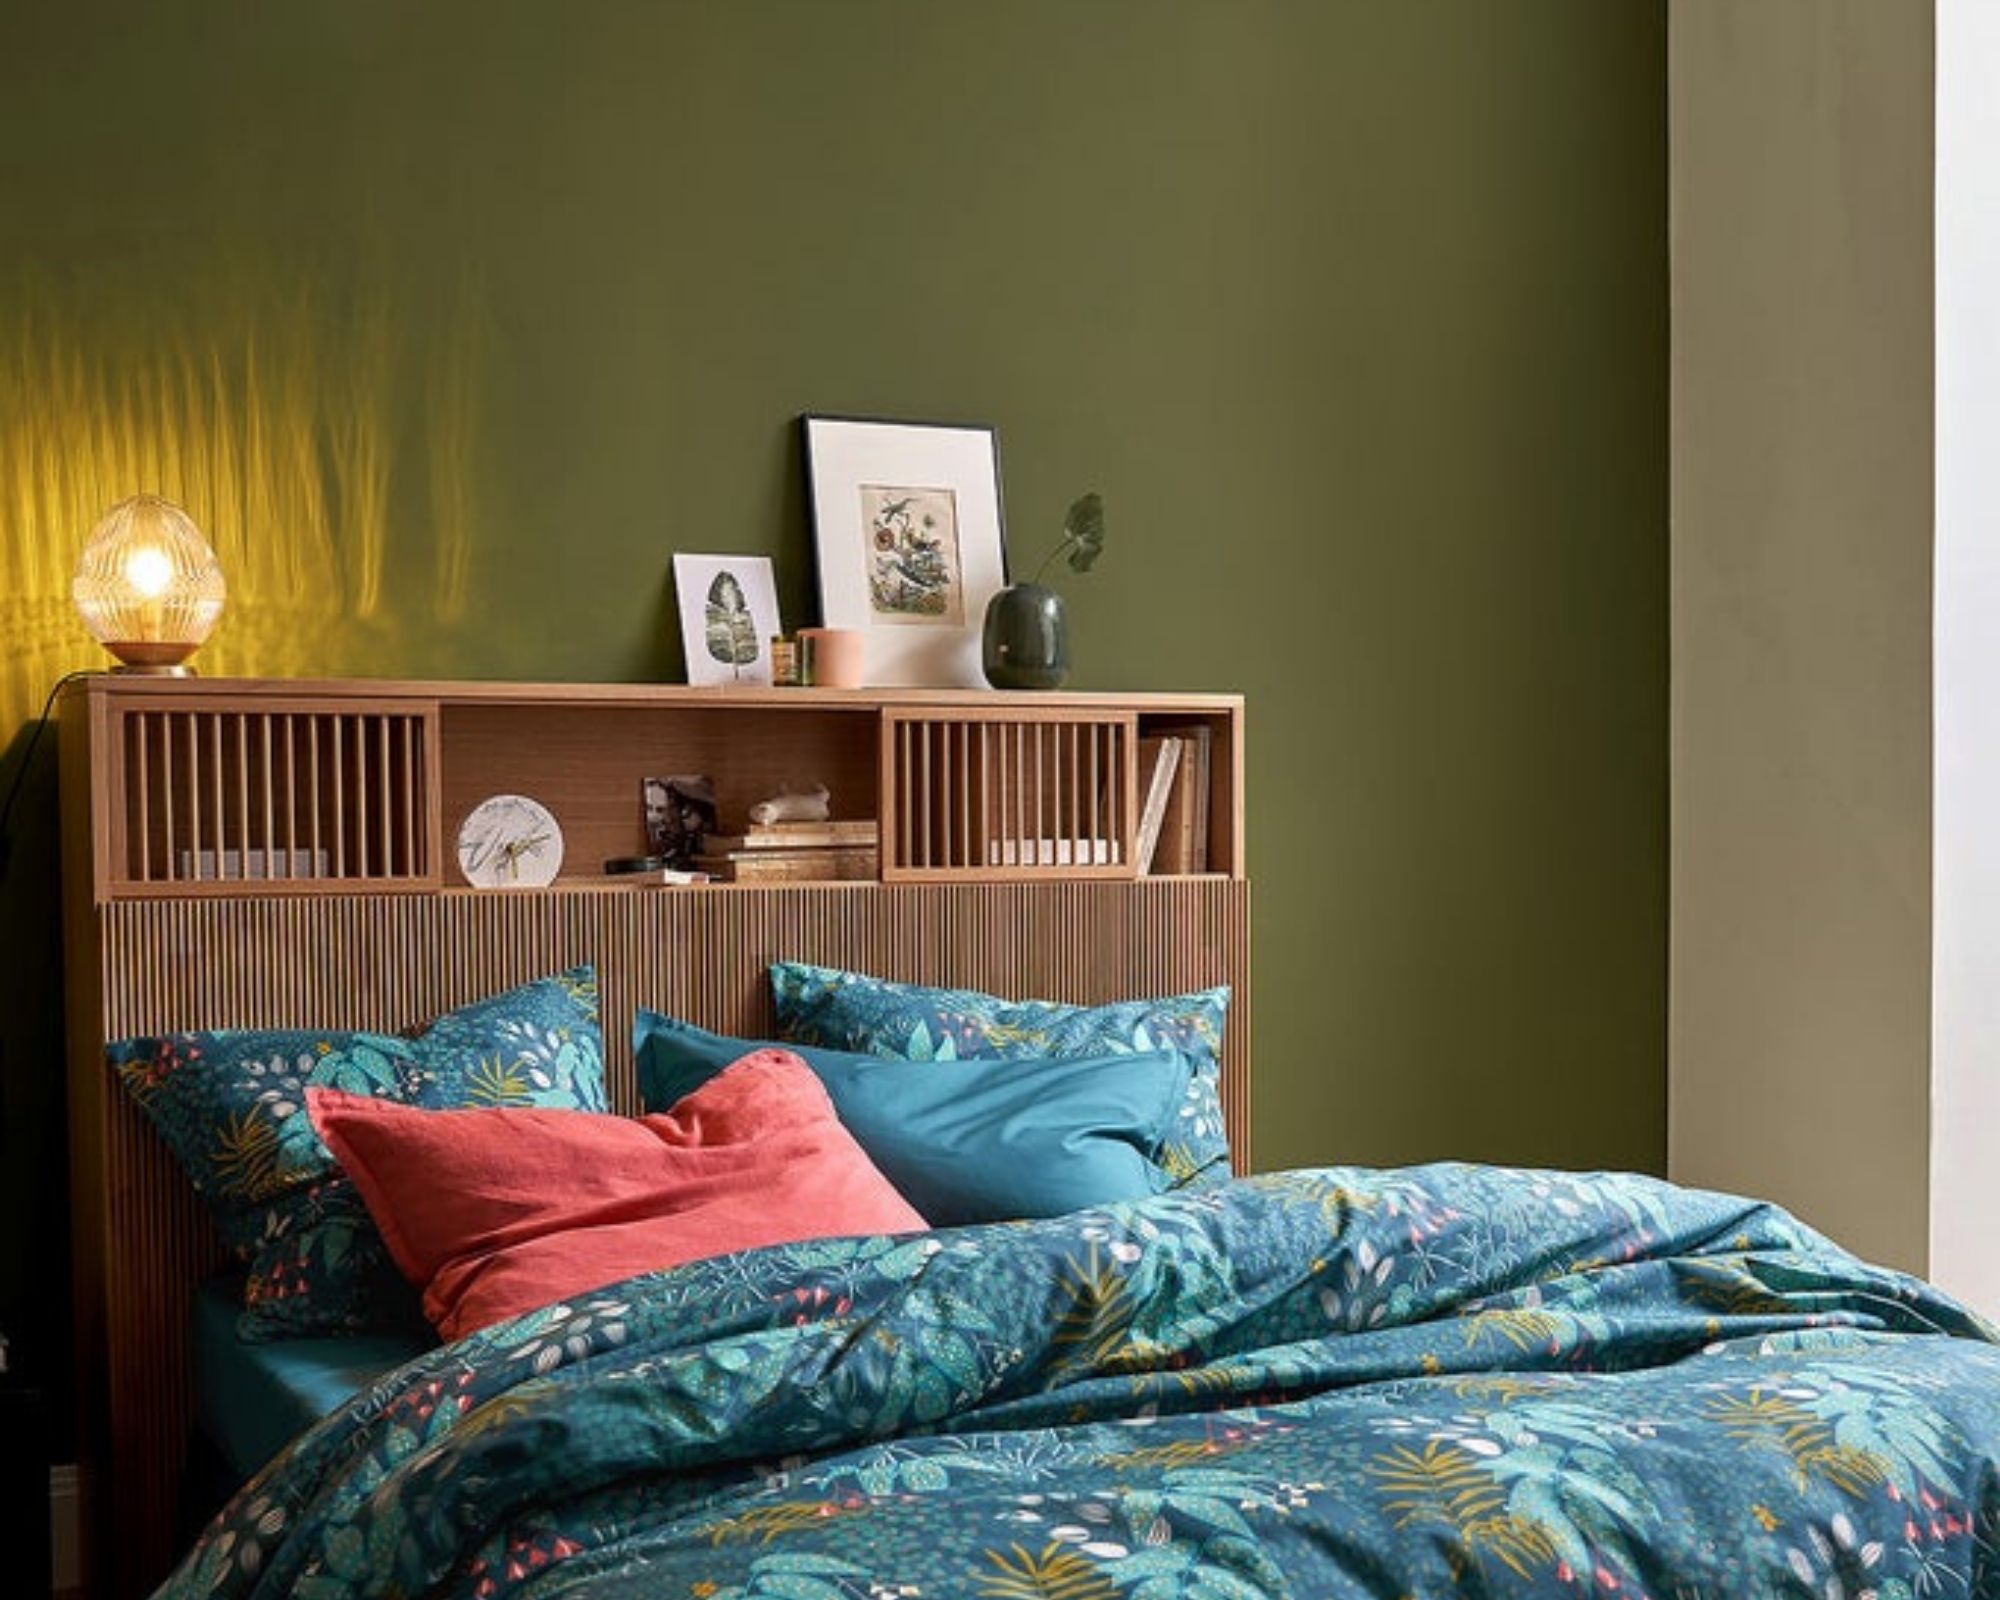 10 Storage Headboards Stylish S, Inexpensive Headboards For Bedside Tables Attached